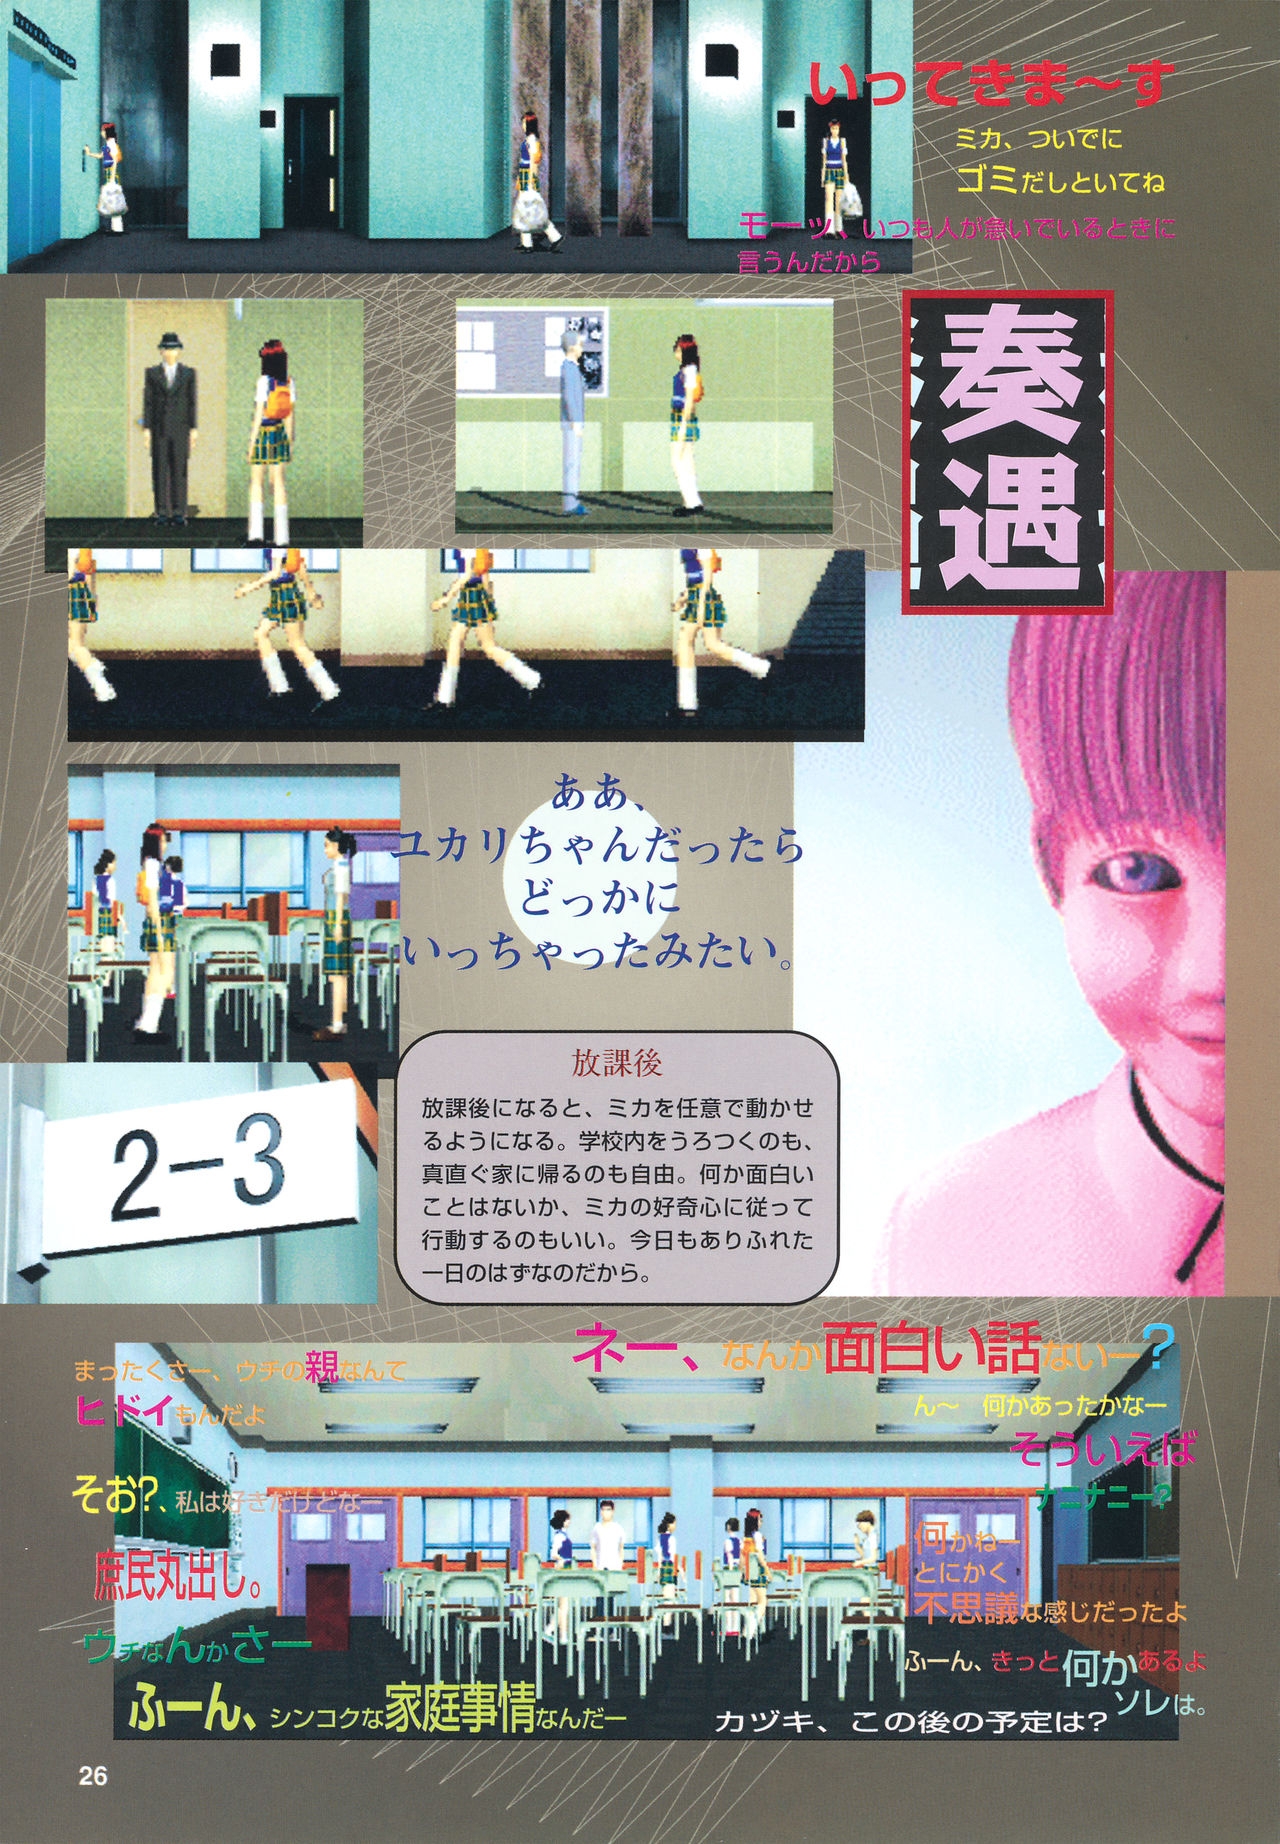 Moonlight Syndrome Visual Guidebook 27